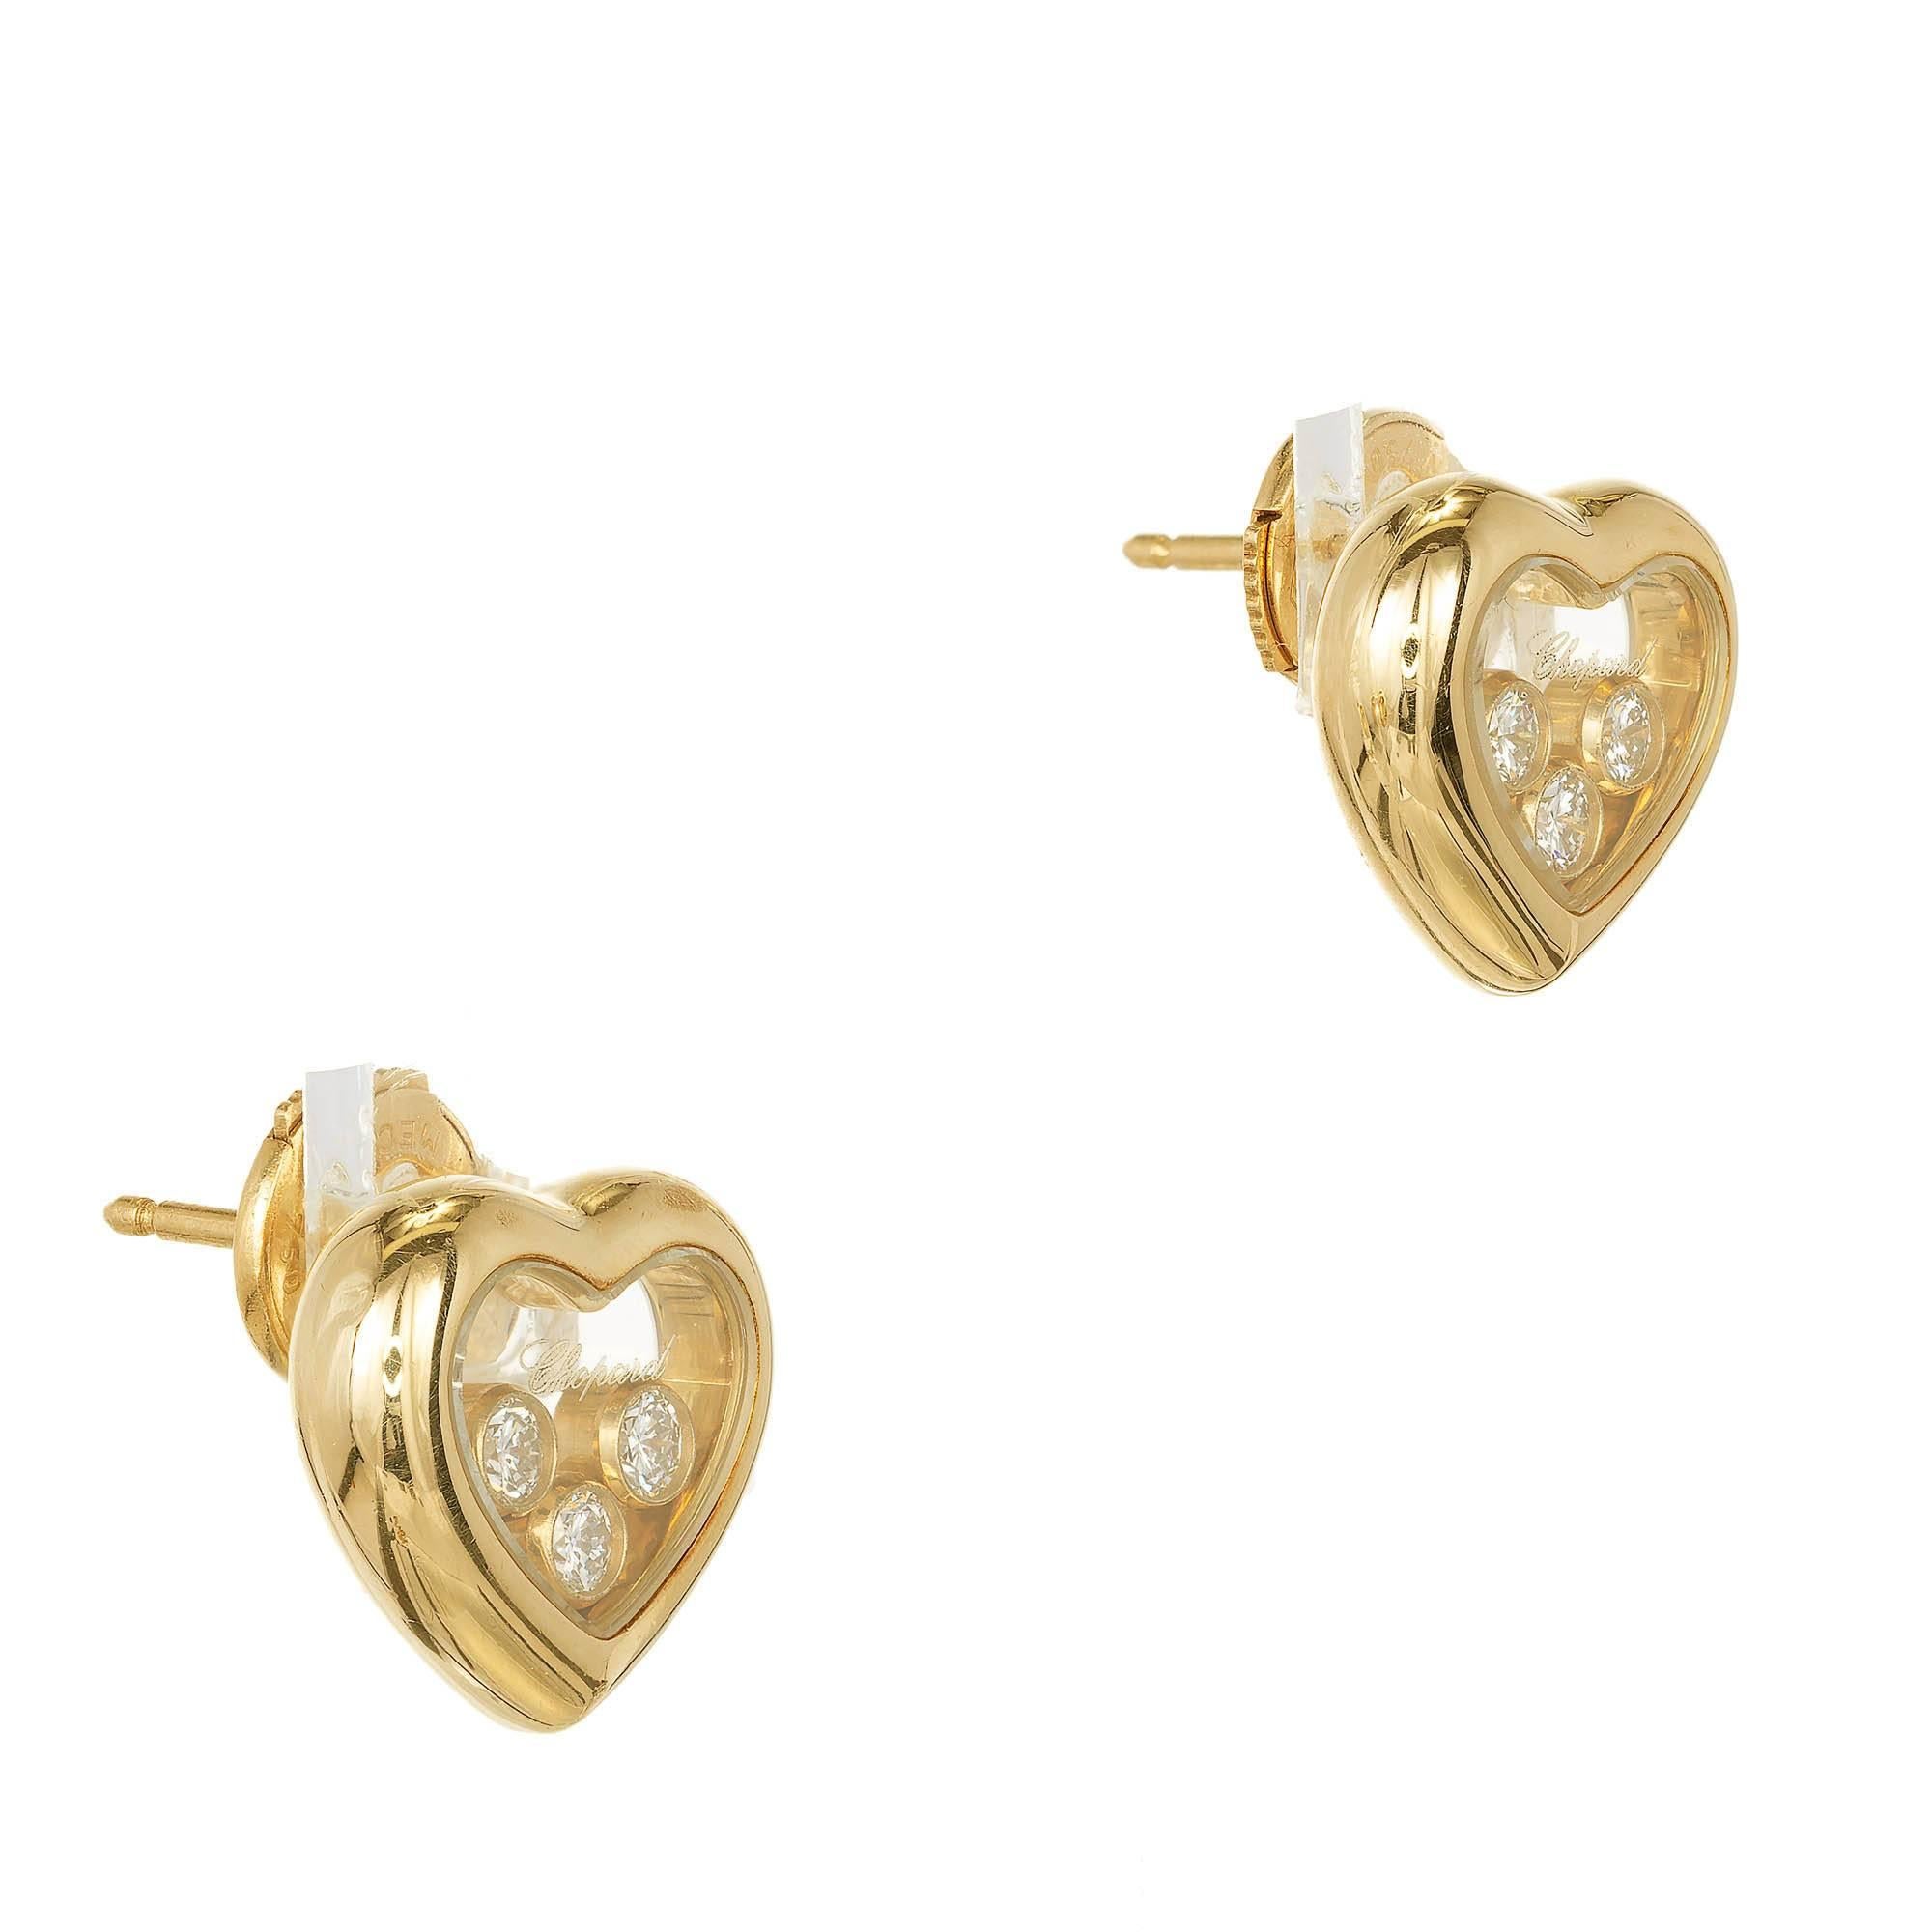 Chopard happy Diamond heart earrings in 18k yellow gold with floating Diamonds. Original earring backs.

6 round full cut Diamonds, approx. total weight .30cts, F, VS
18k yellow gold
Tested: 18k
Stamped: 750
Hallmark: Chopard 922 9554 83/4611-20
6.6